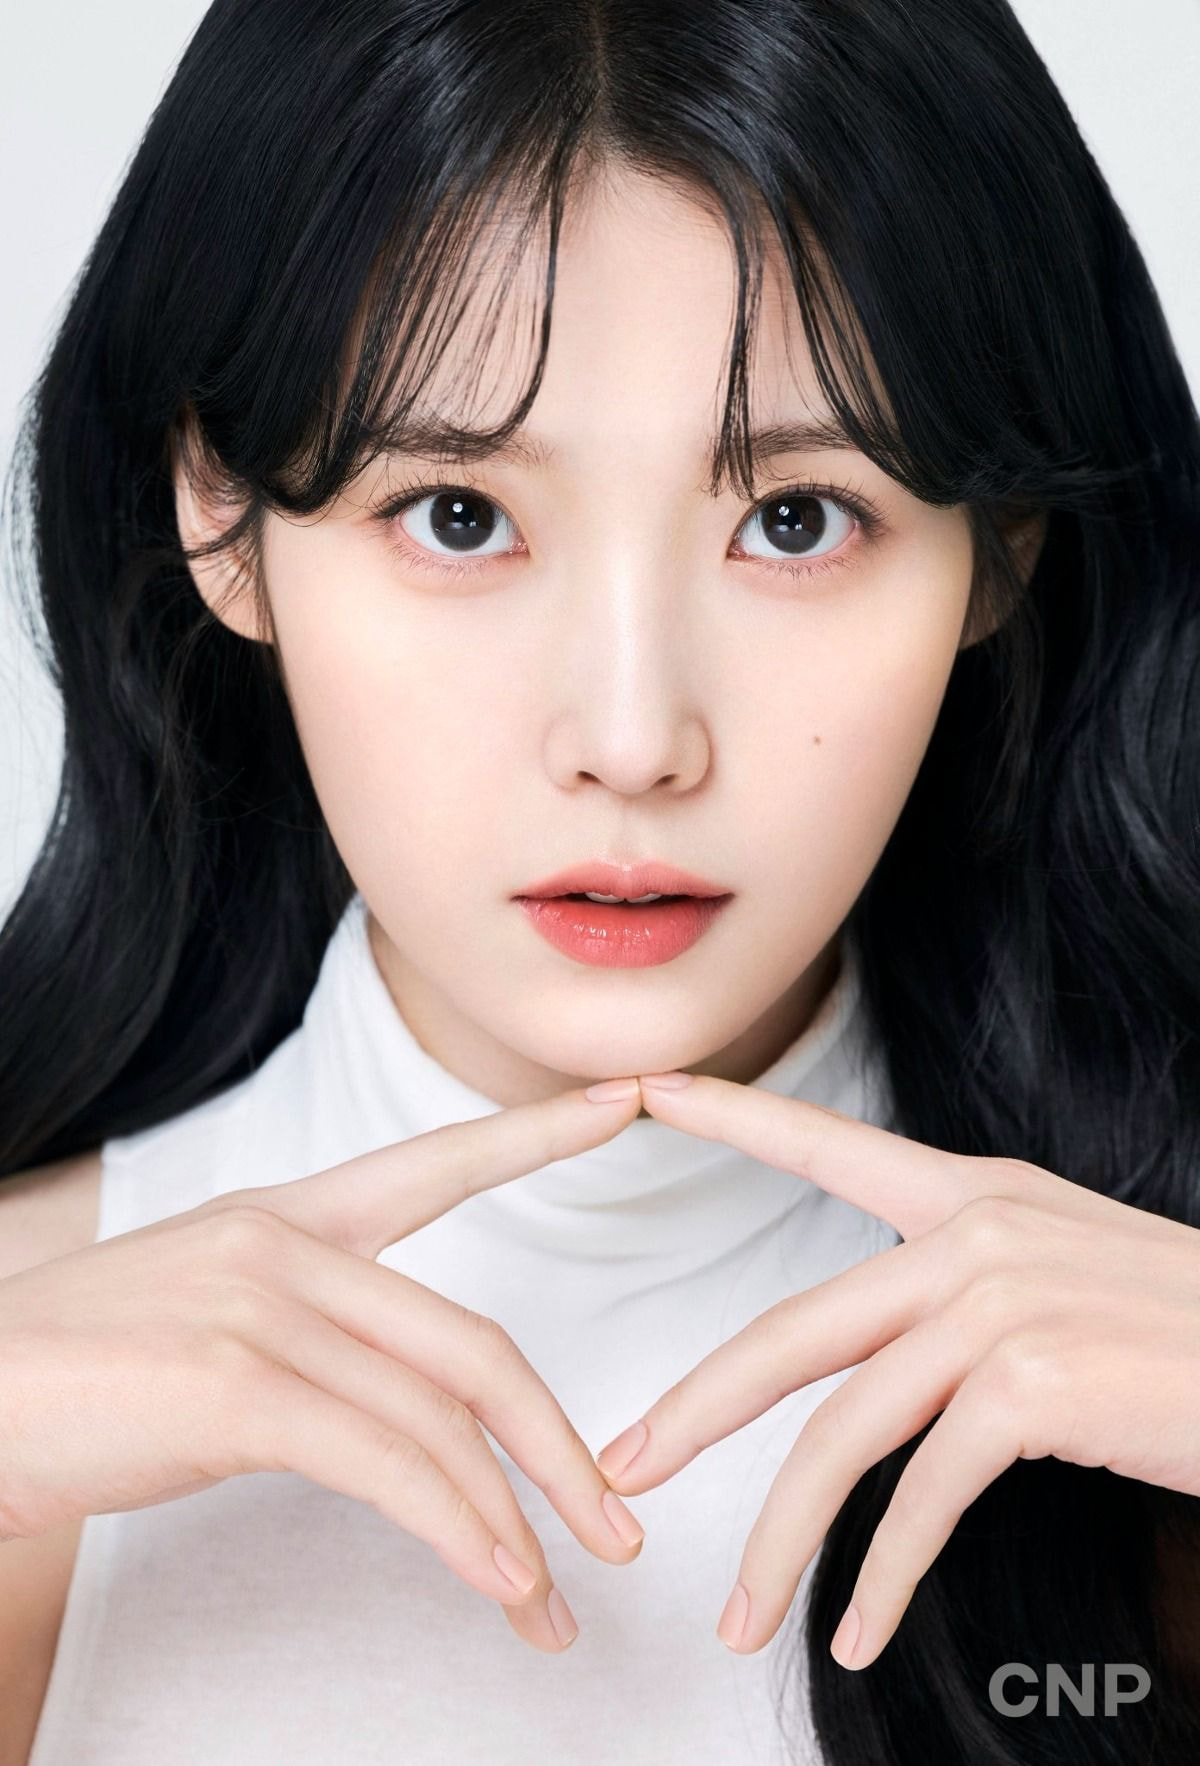 The national younger sister IU once begged the company to get plastic surgery but was refused for unexpected reasons - Photo 2.